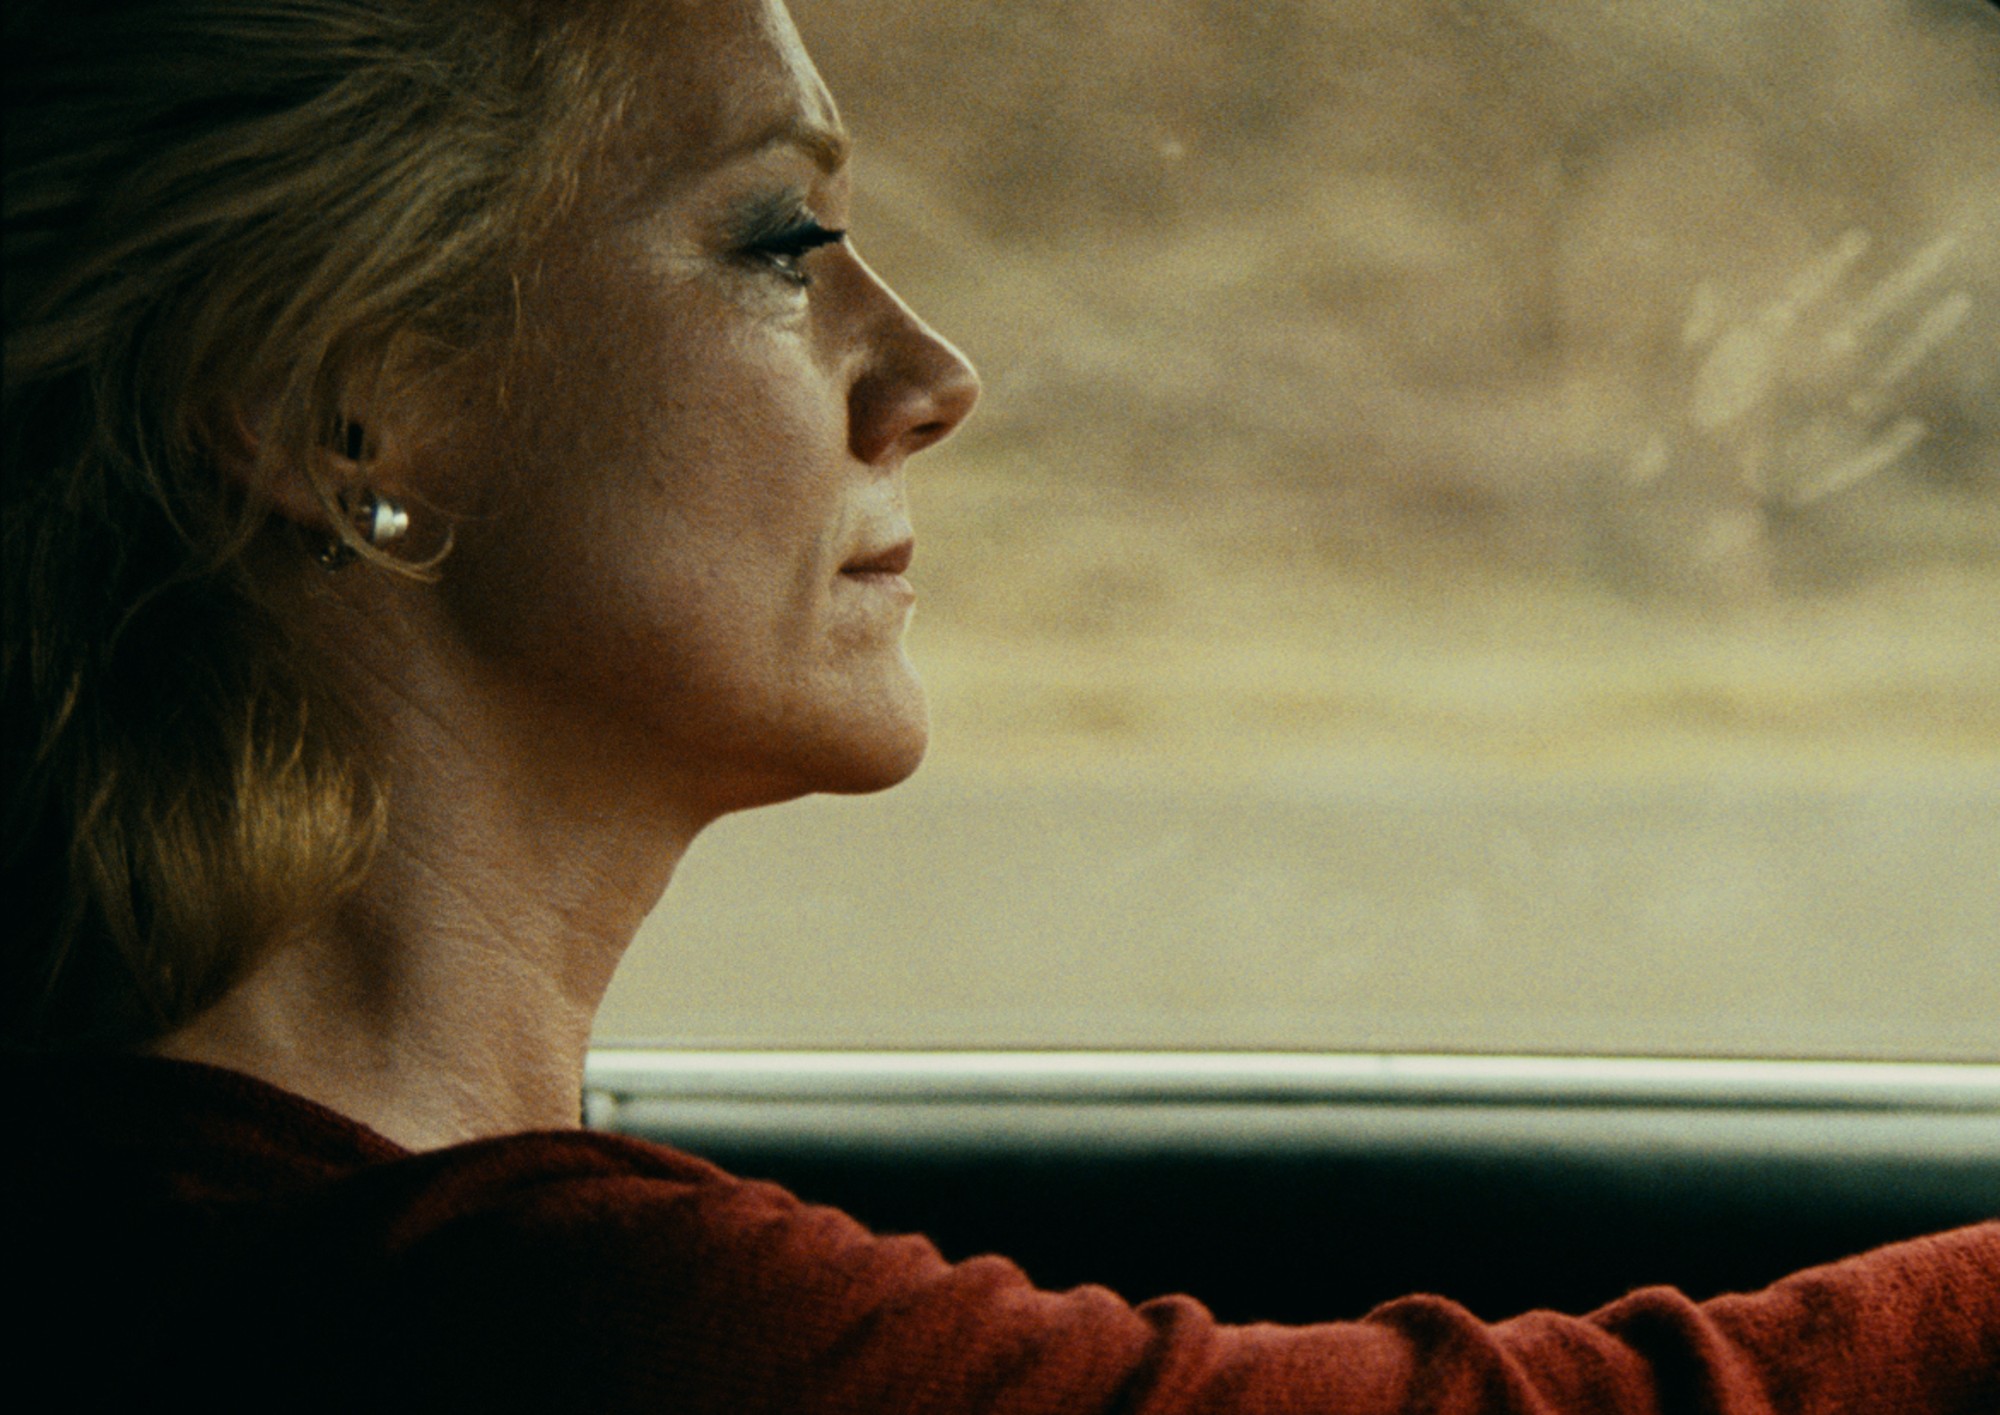 Image from the motion picture The Headless Woman